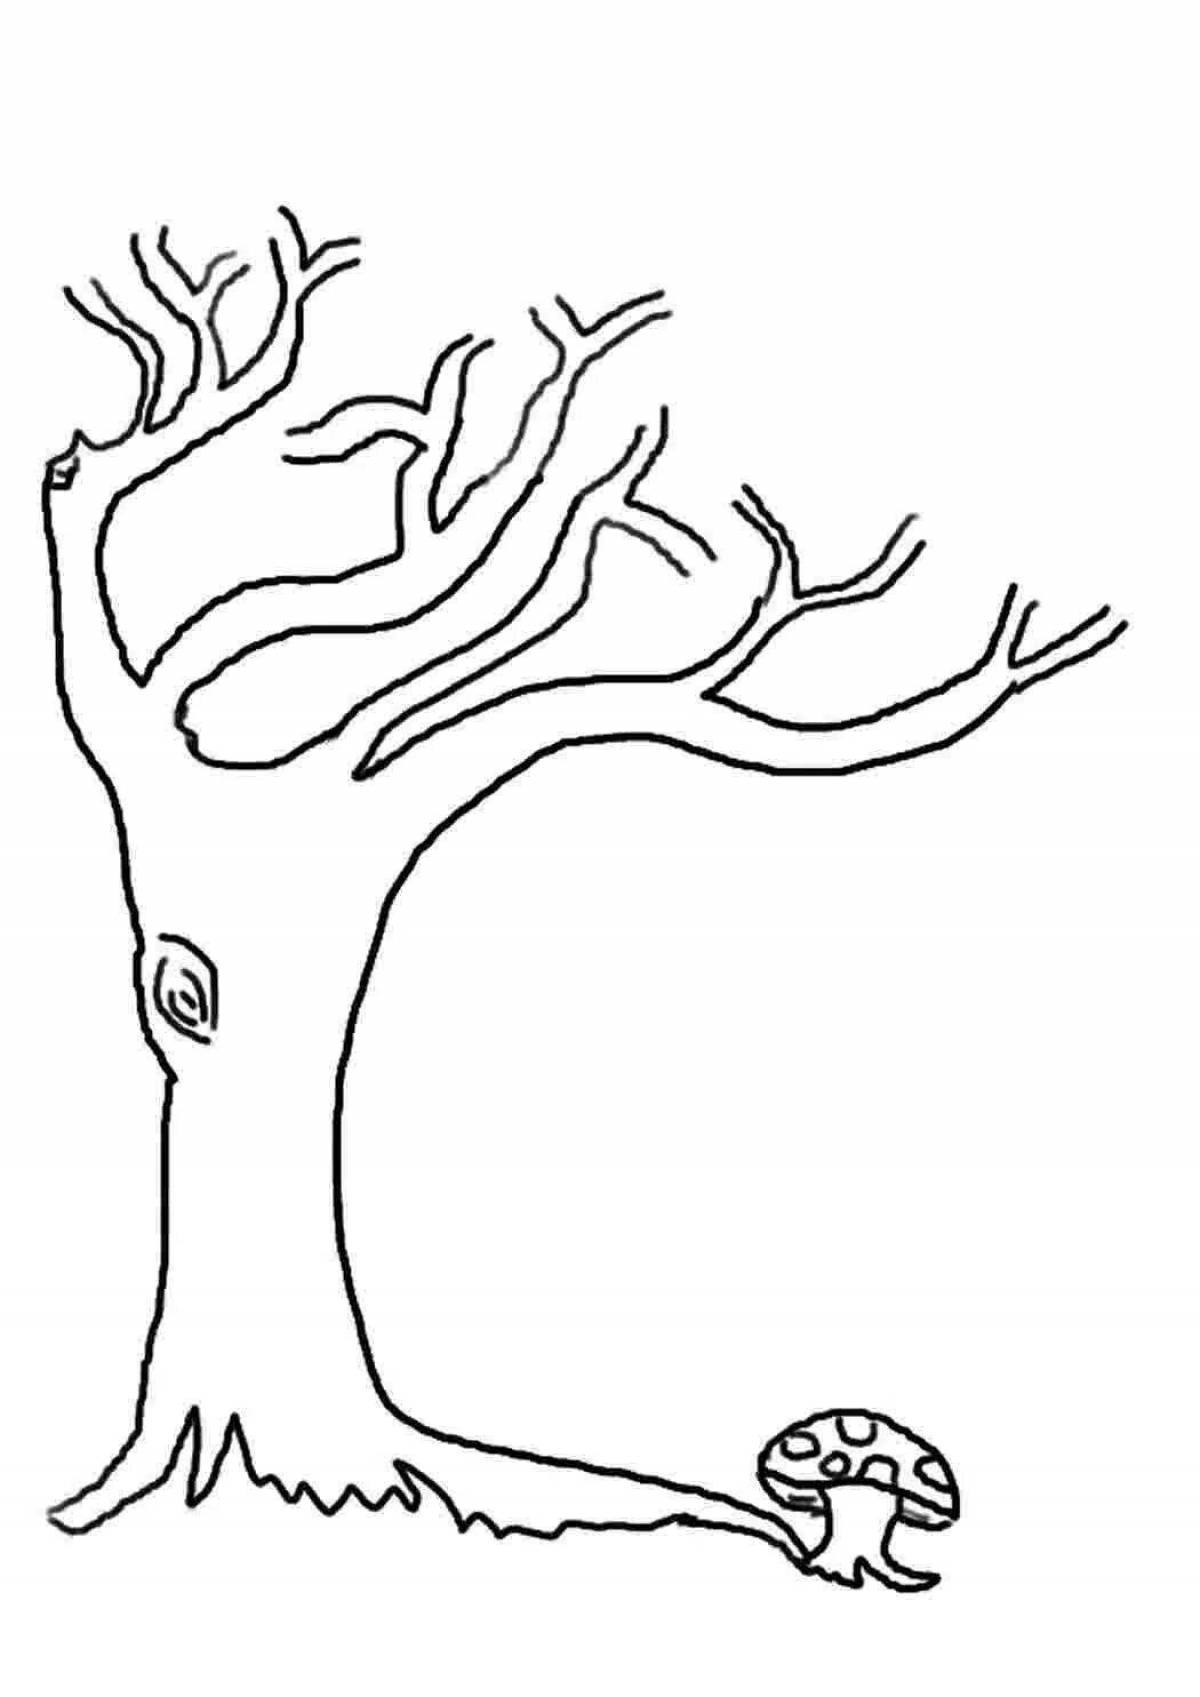 Adorable tree trunk coloring book for kids